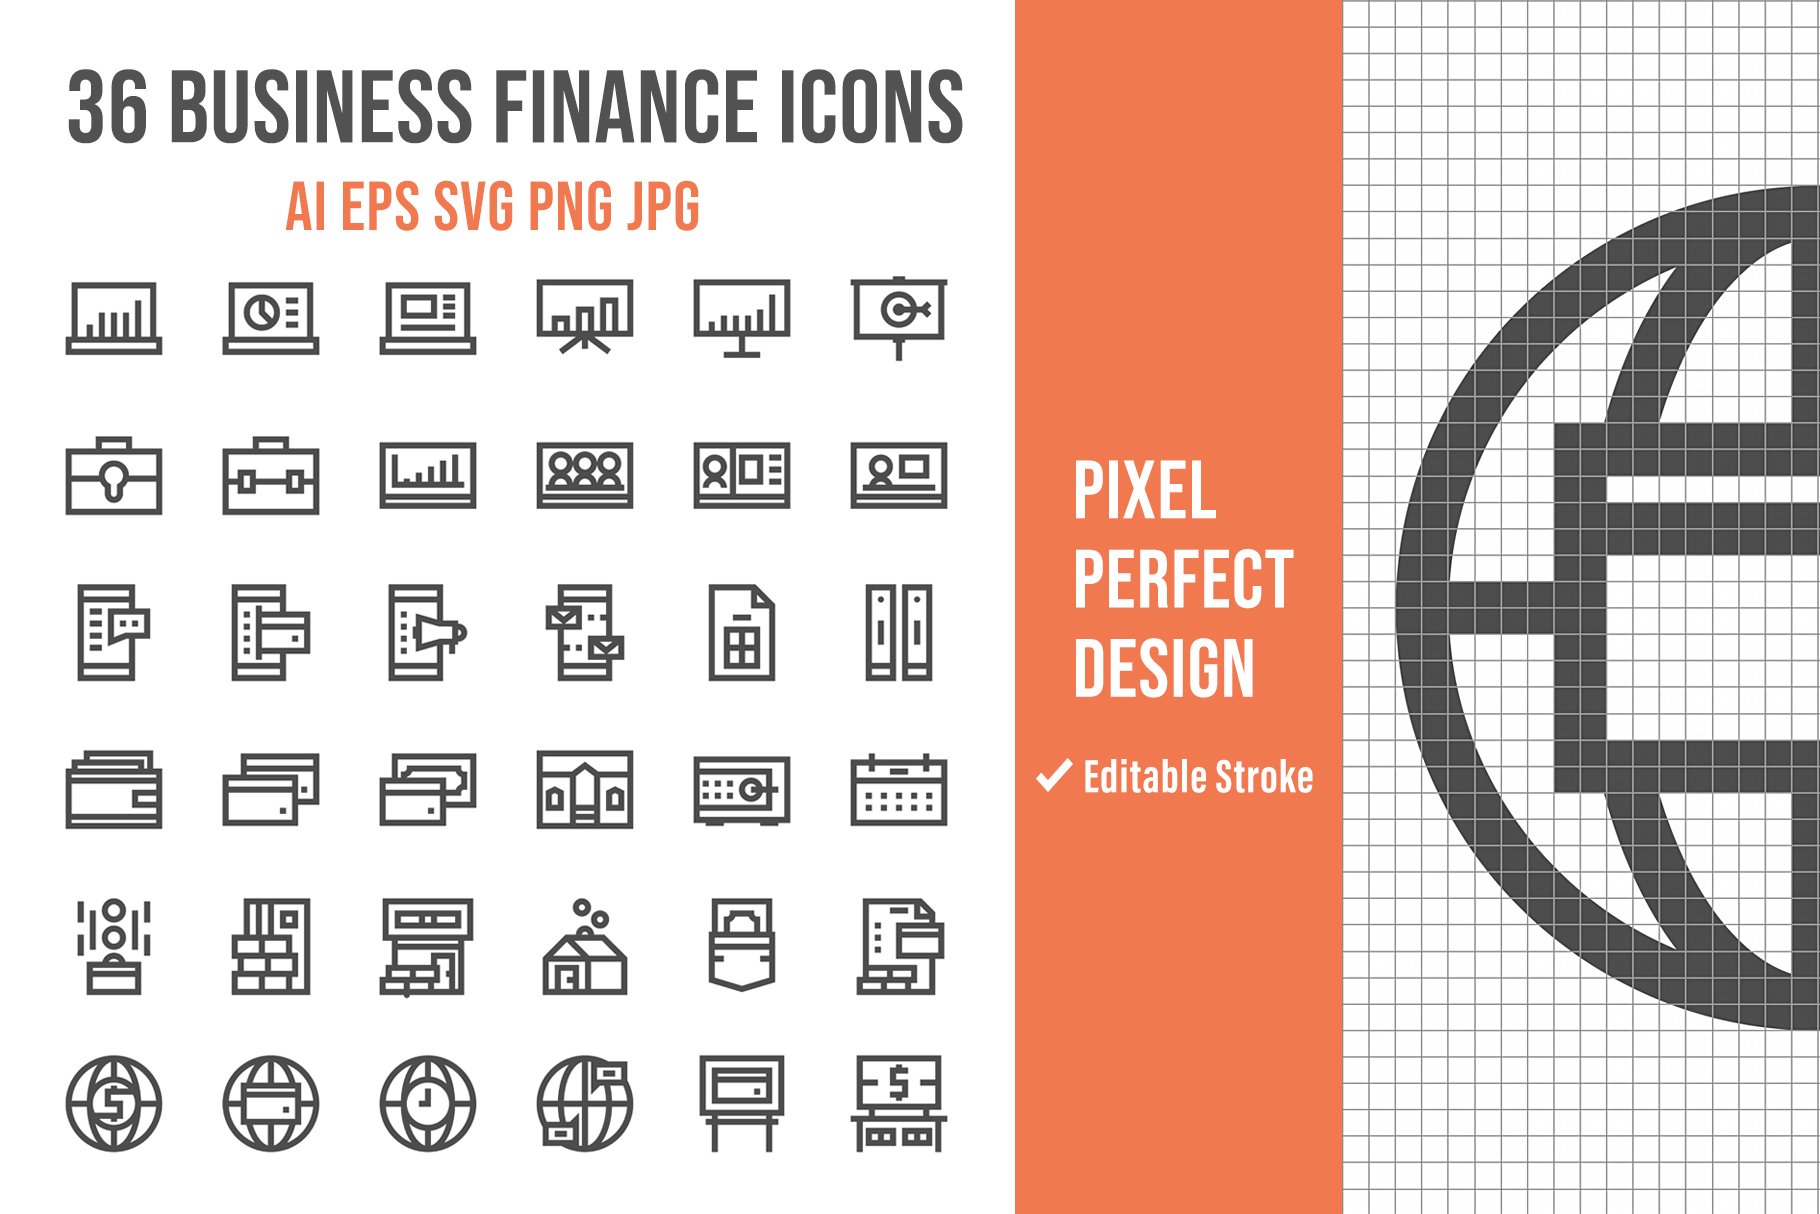 36 Business Finance Outline Icons cover image.